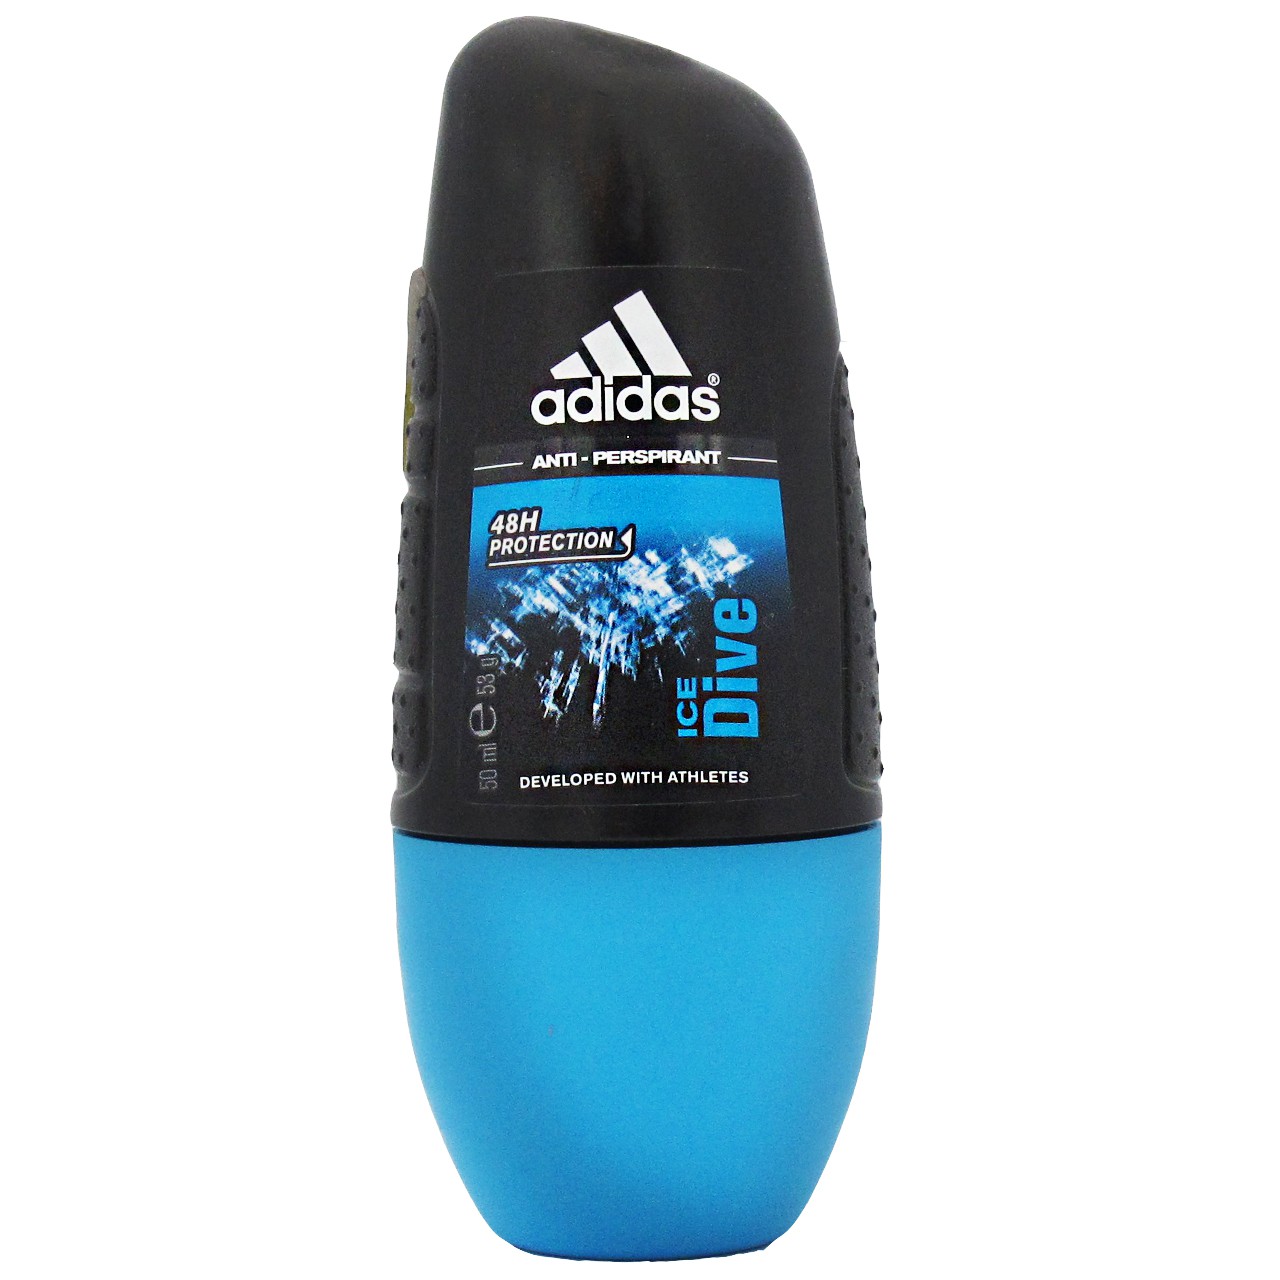 Adidas Ice Dive Roll-On Deodorant For Men 50ml